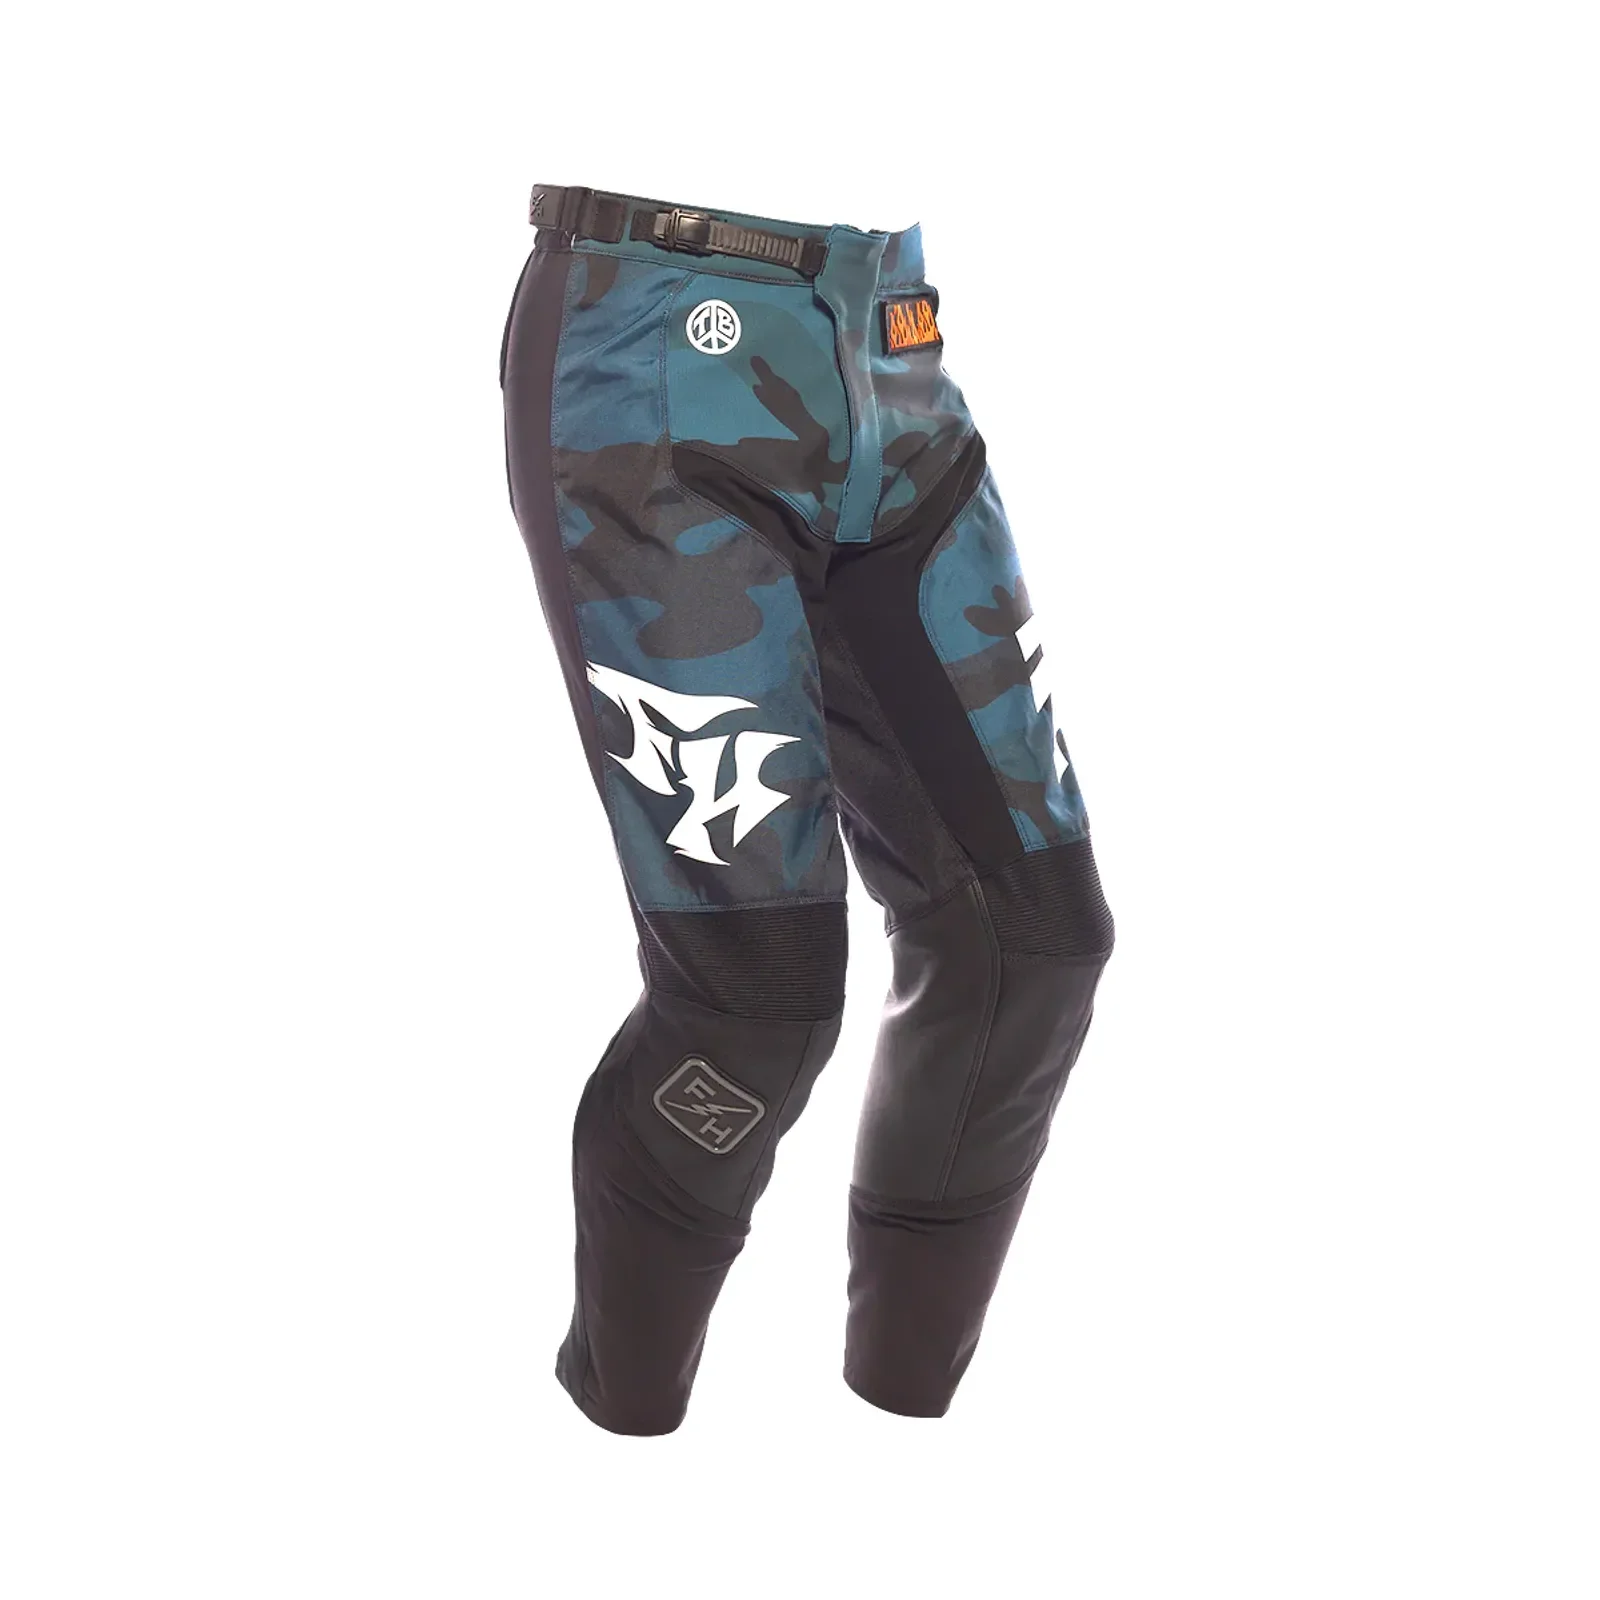 Fasthouse Grindhouse Bereman Youth Pant (Blue Camo)